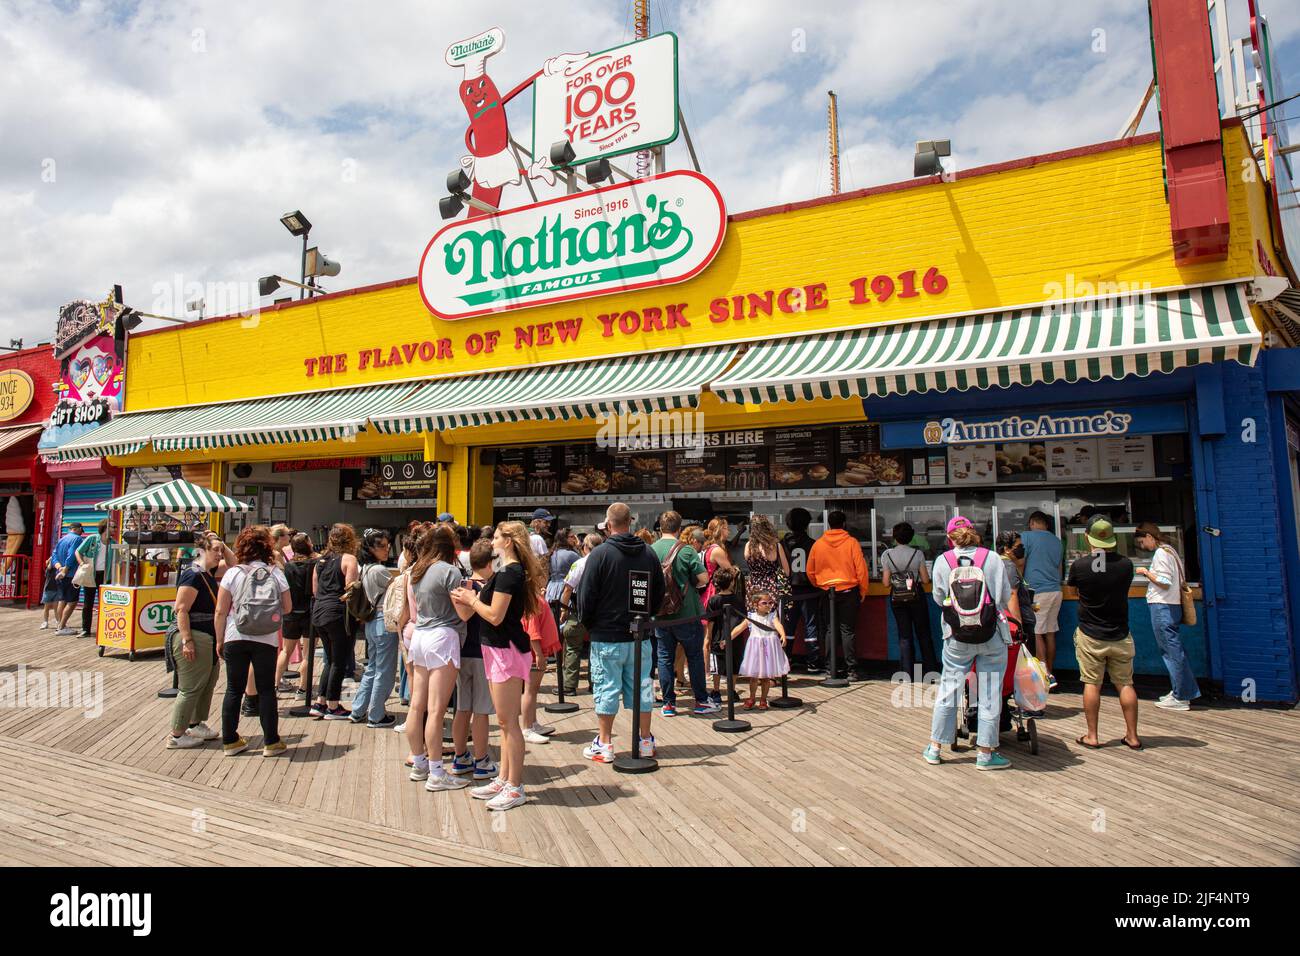 People queuing in front of Nathan's Famous fast food restaurant in Coney Island amusement park in Brooklyn borough of New York City, United States Stock Photo